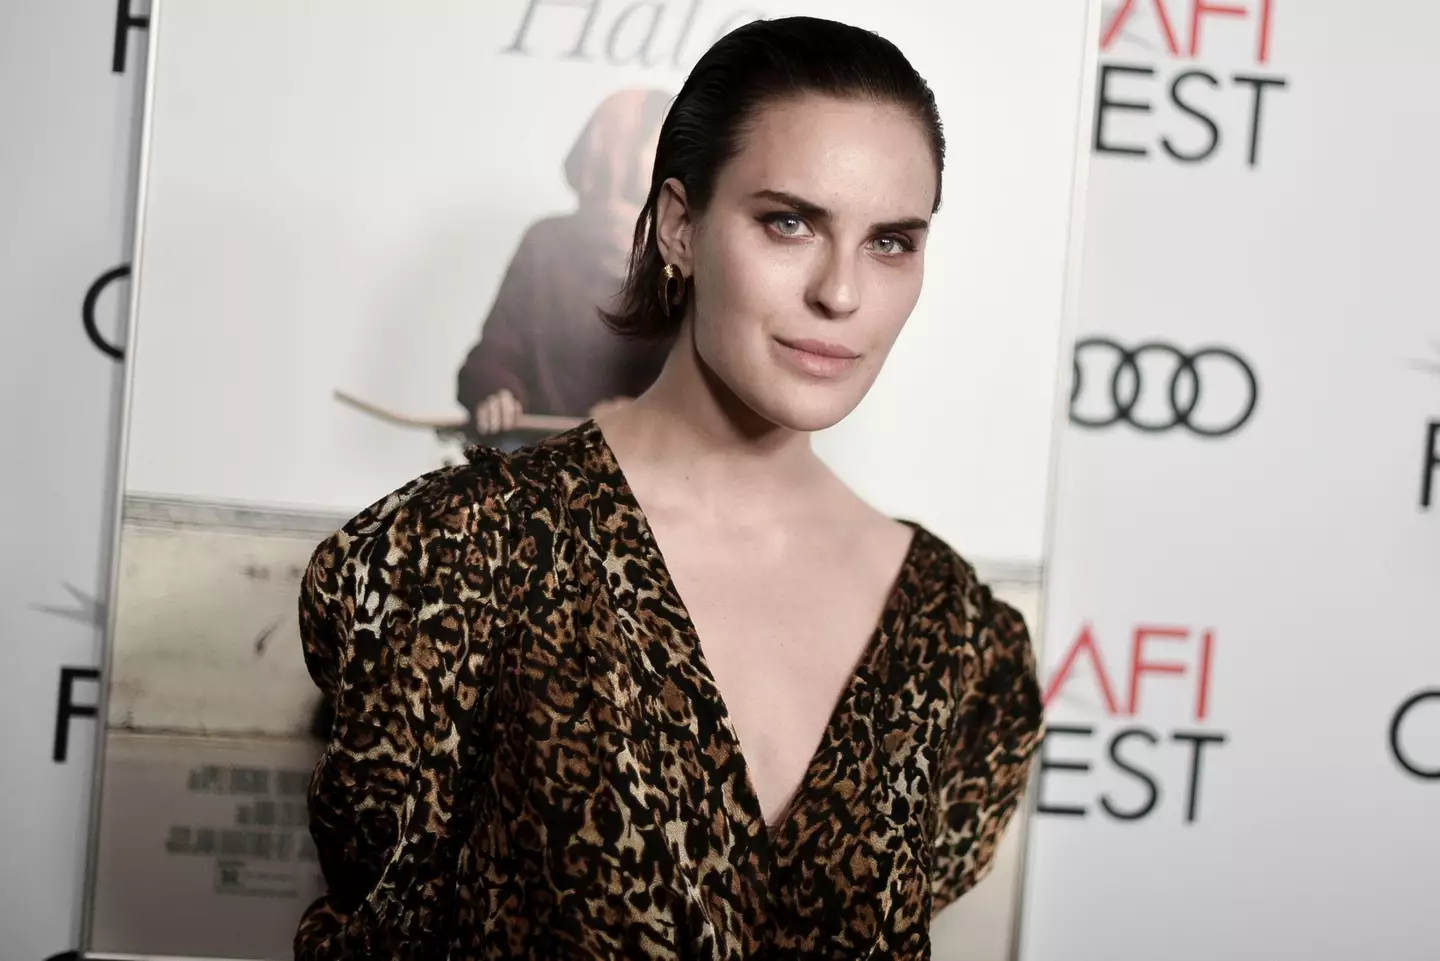 Tallulah Willis has admitted she's still 'unpacking' her childhood in the spotlight.